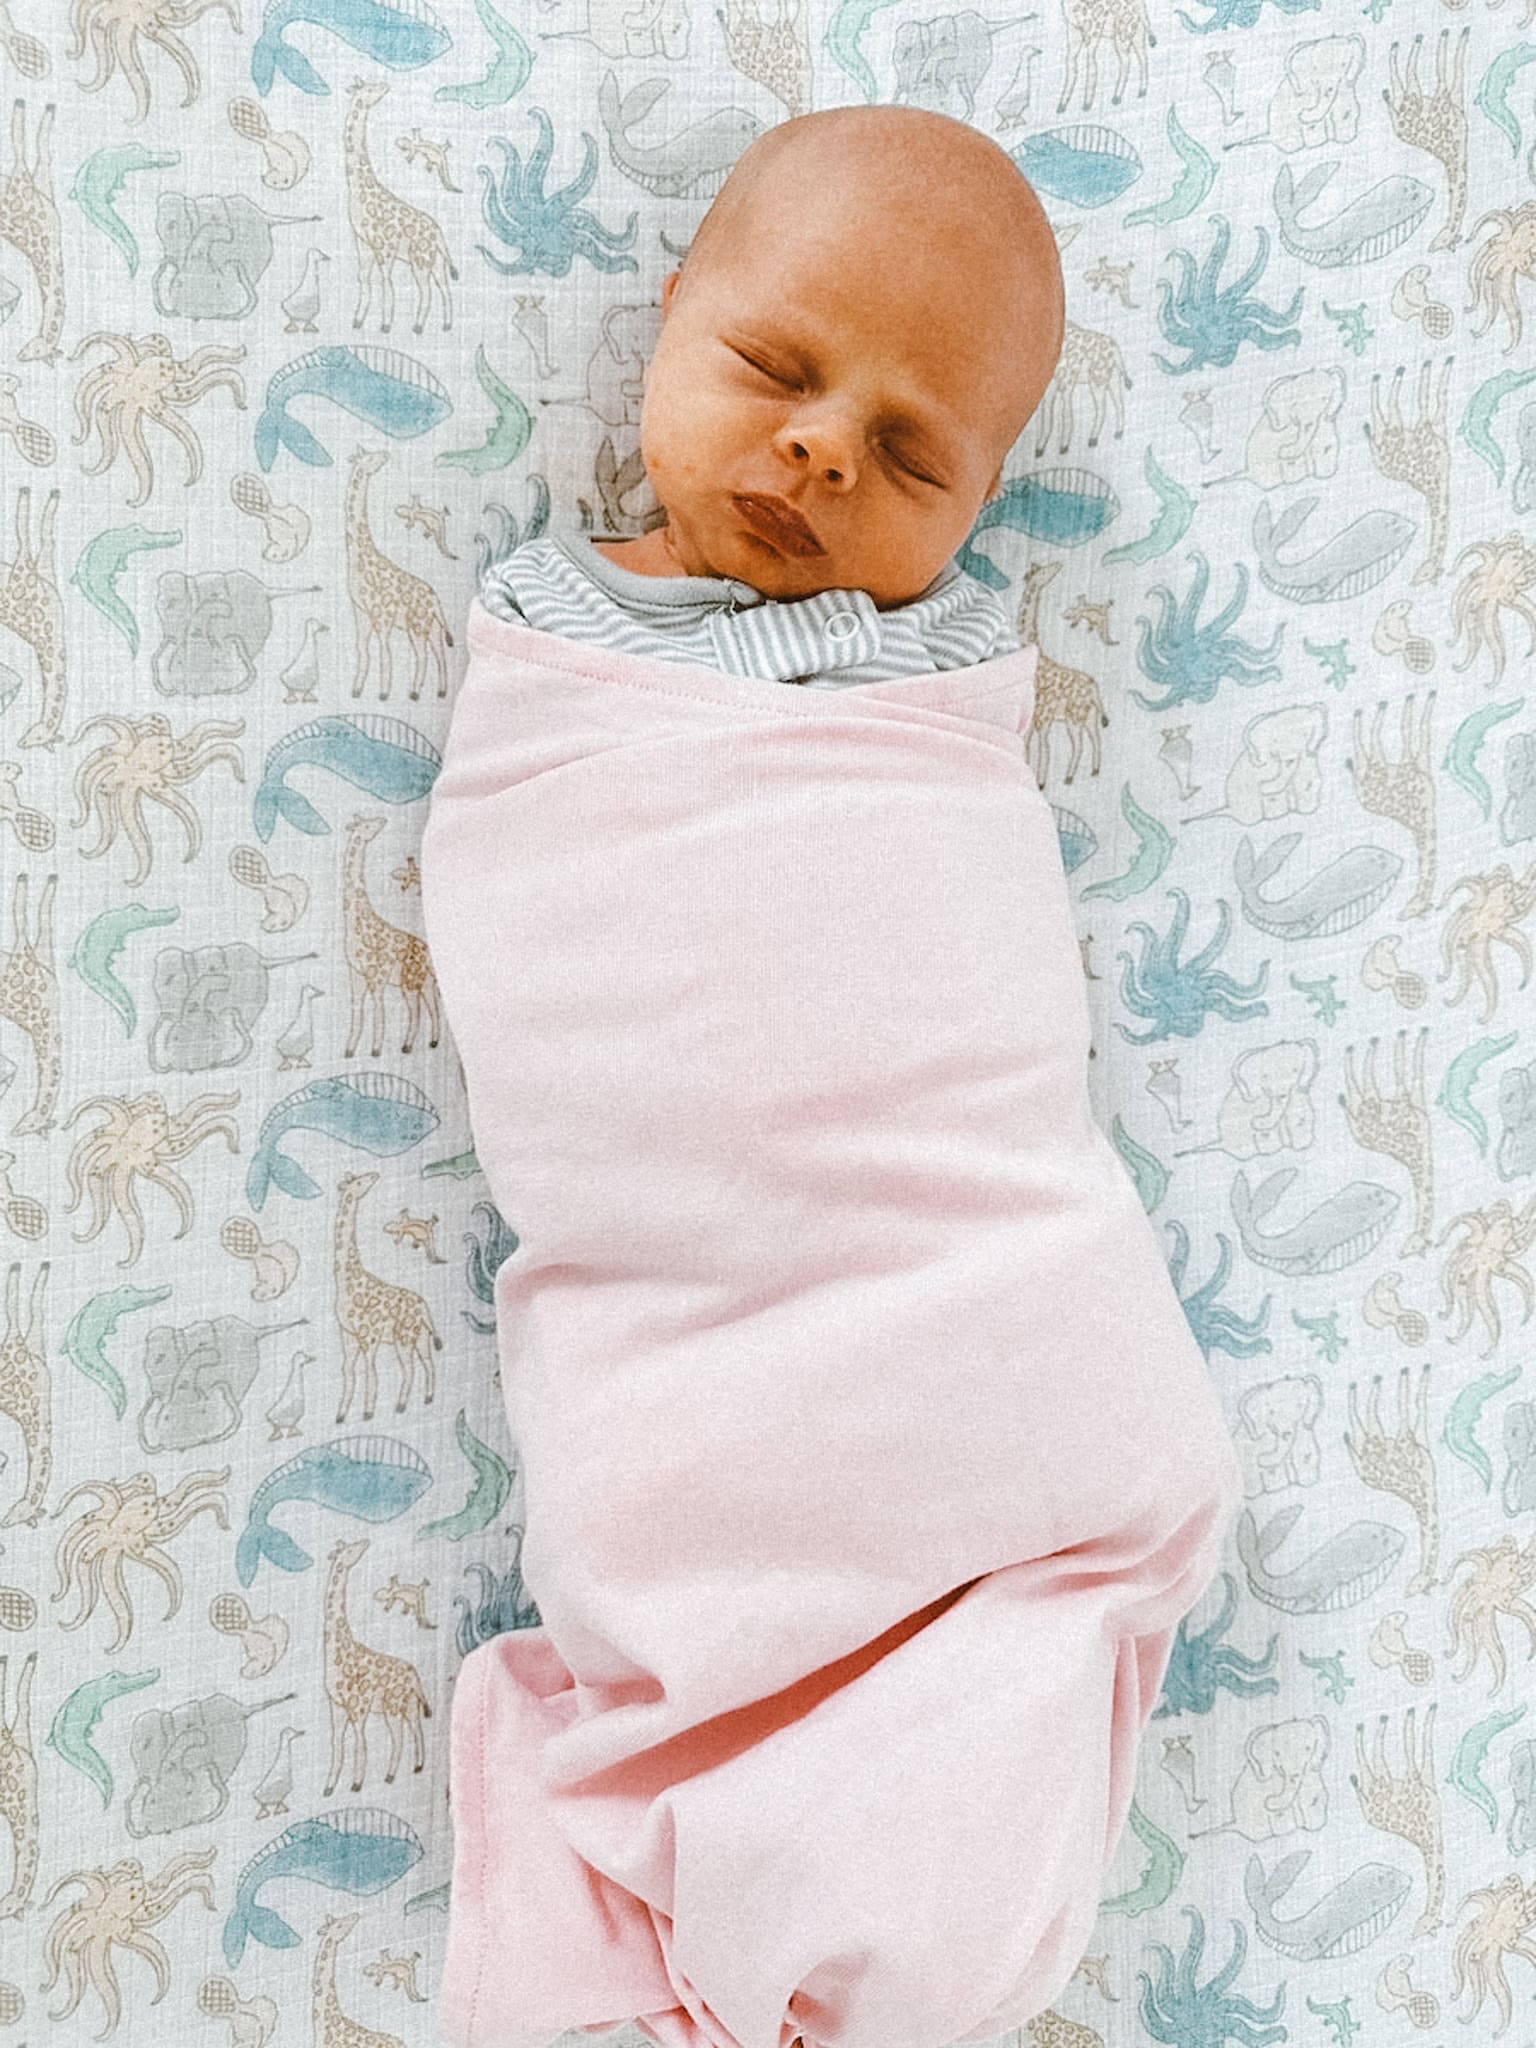 A swaddle should be snug but not tight. Make sure that two fingers can slide between the chest and swaddle. The top of the swaddle should reach the shoulders and chest of your baby.